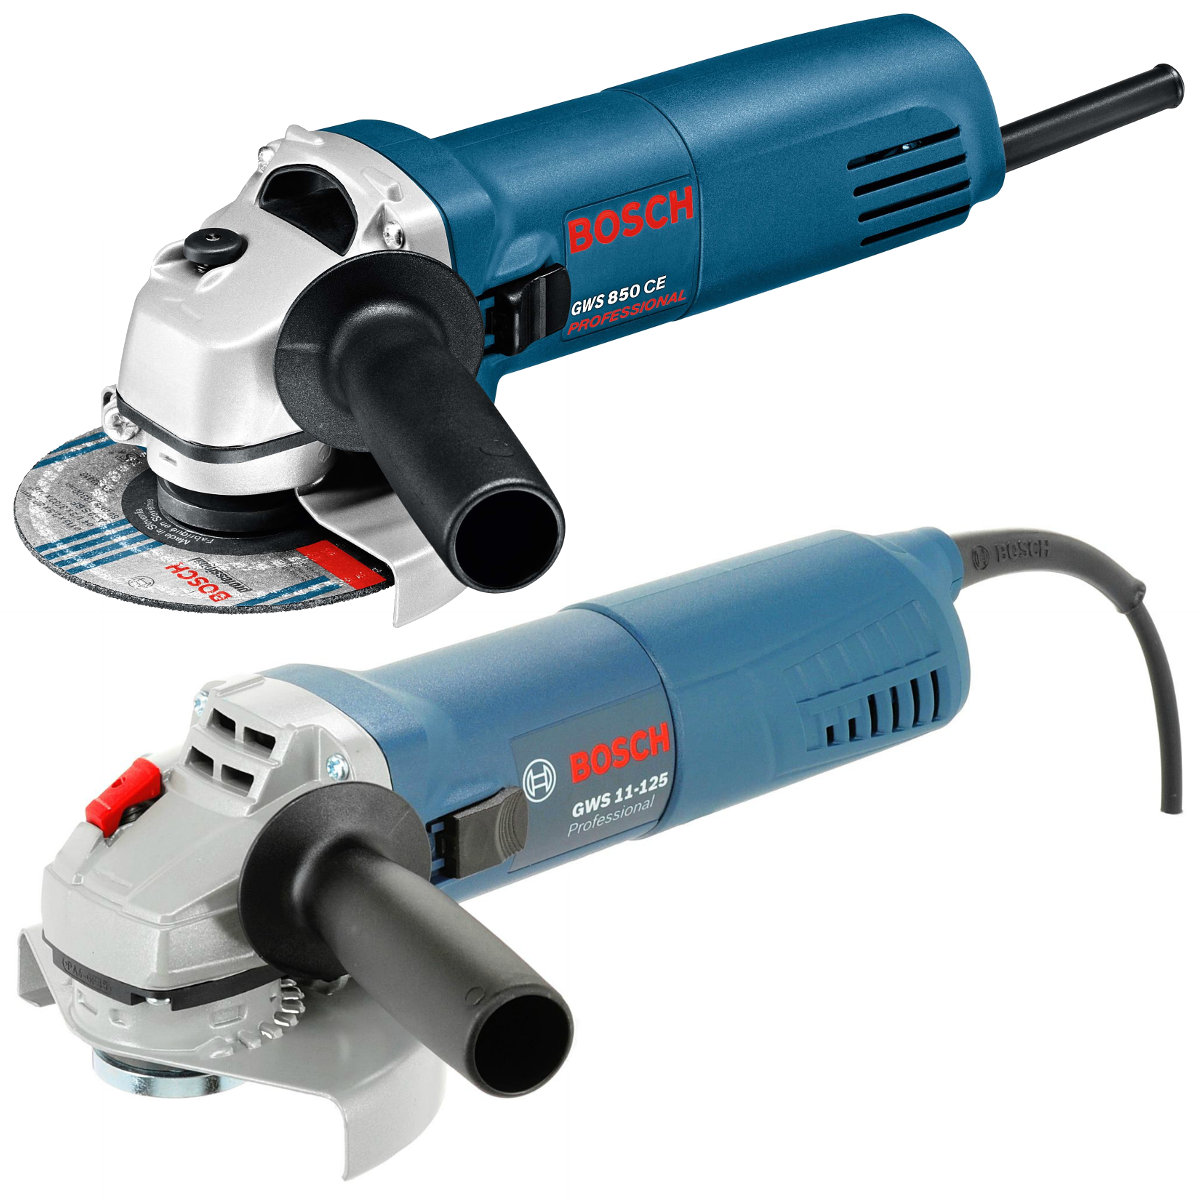 https://www.wellerhire.co.uk/wp-content/uploads/Angle-Grinder-115mm-125mm-Tool-Hire.jpg